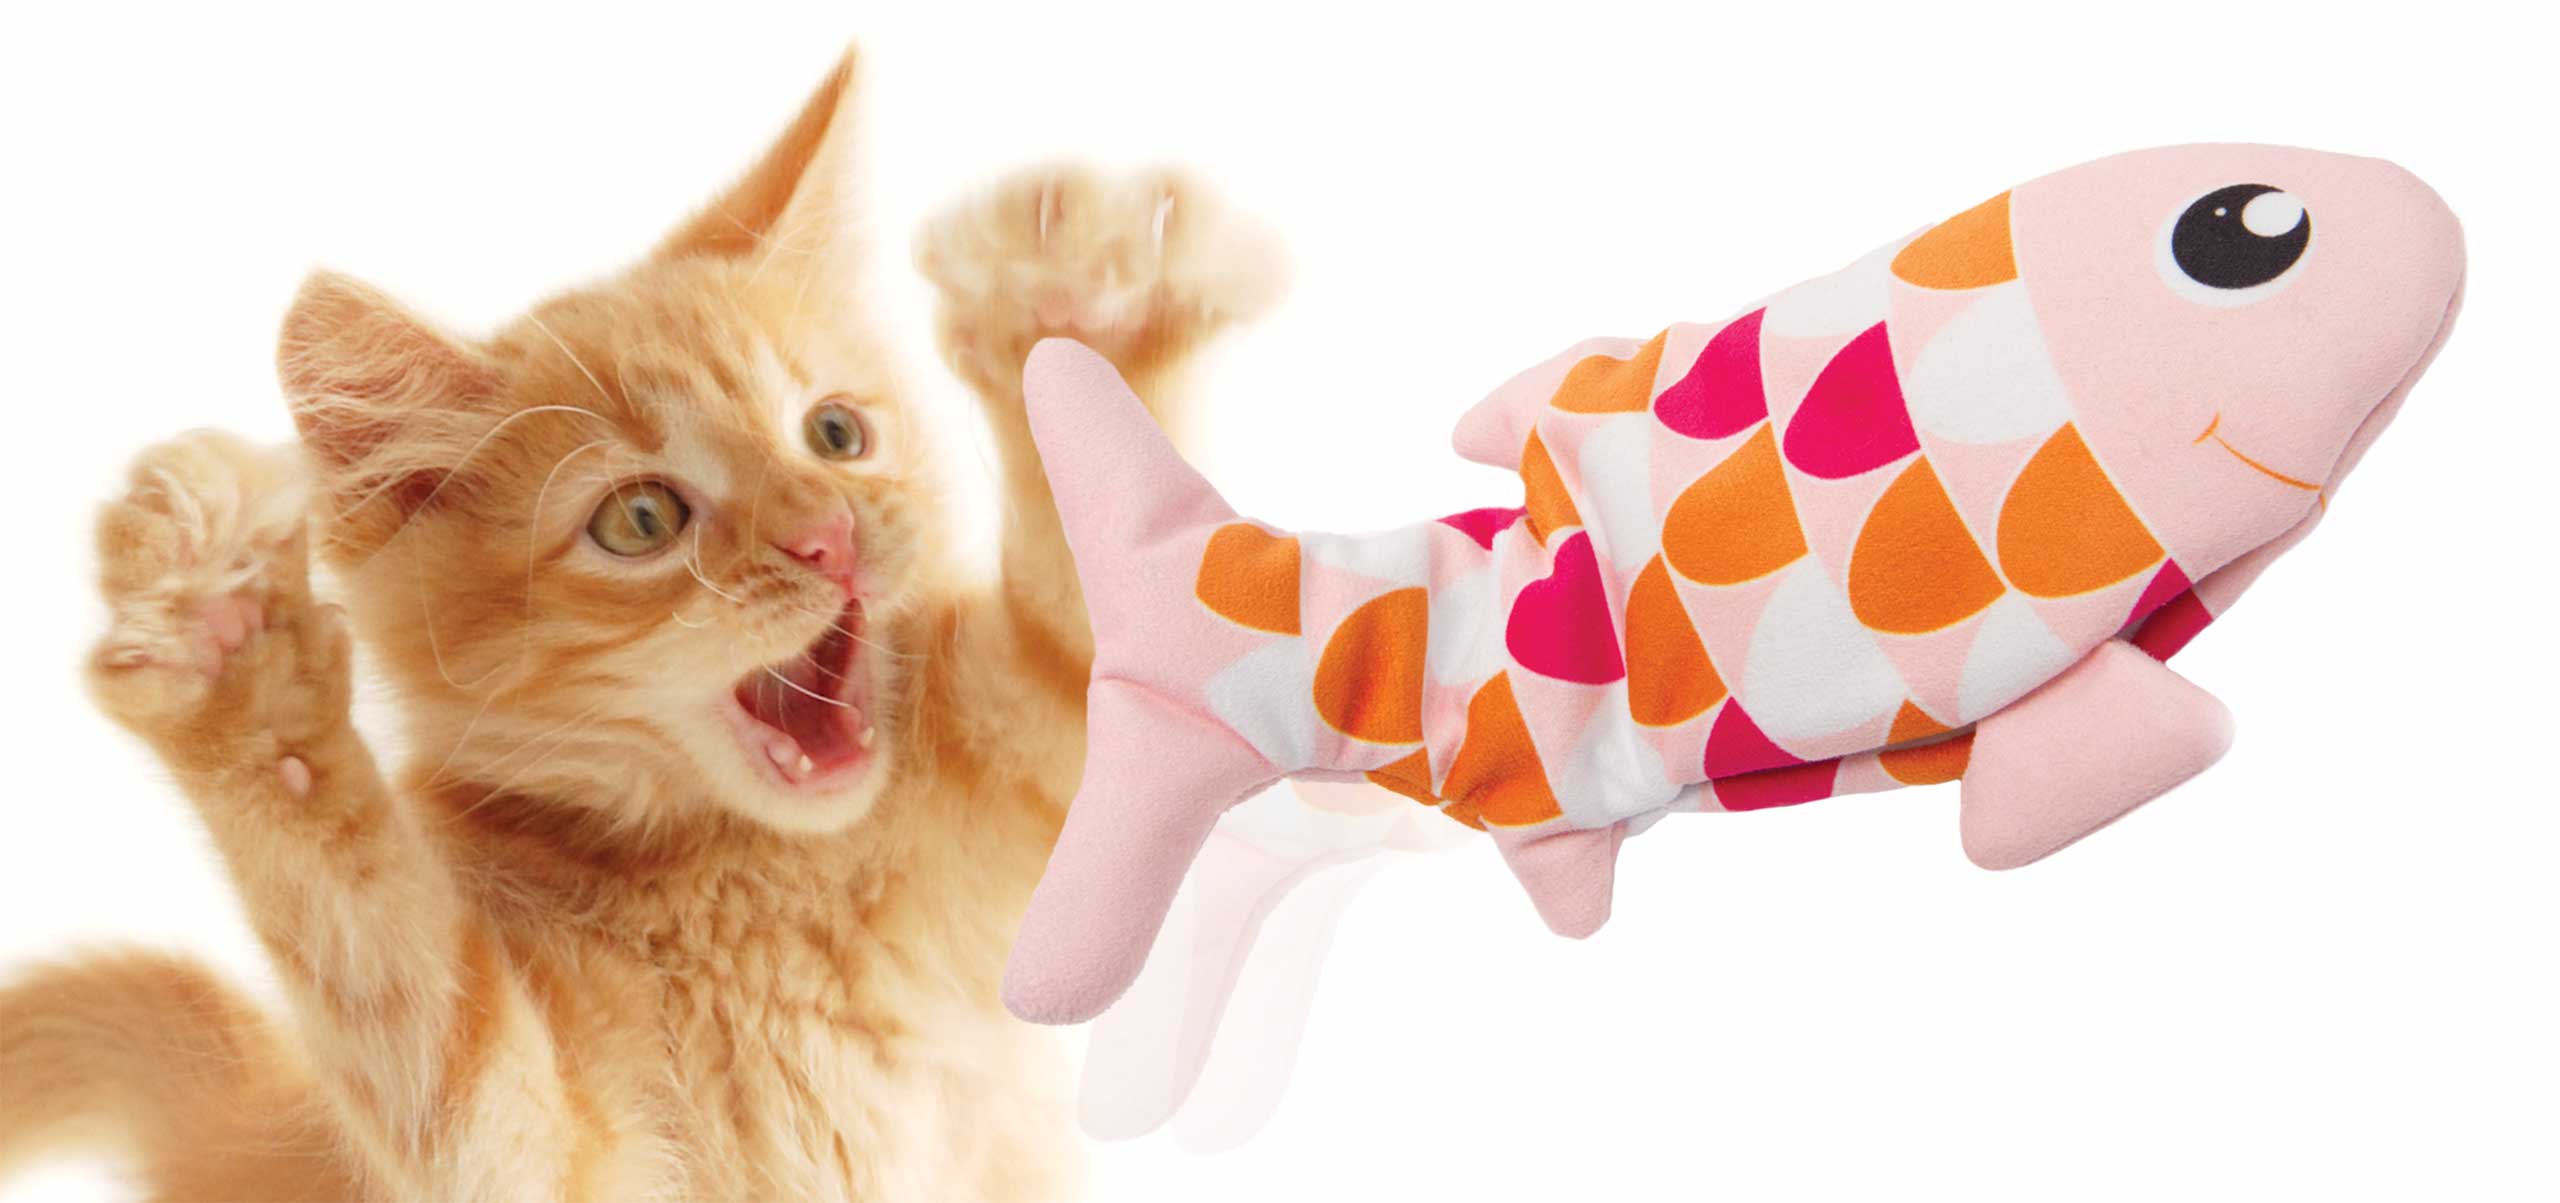 Motion-activated dancing toy fish that starts moving with a tap of a paw